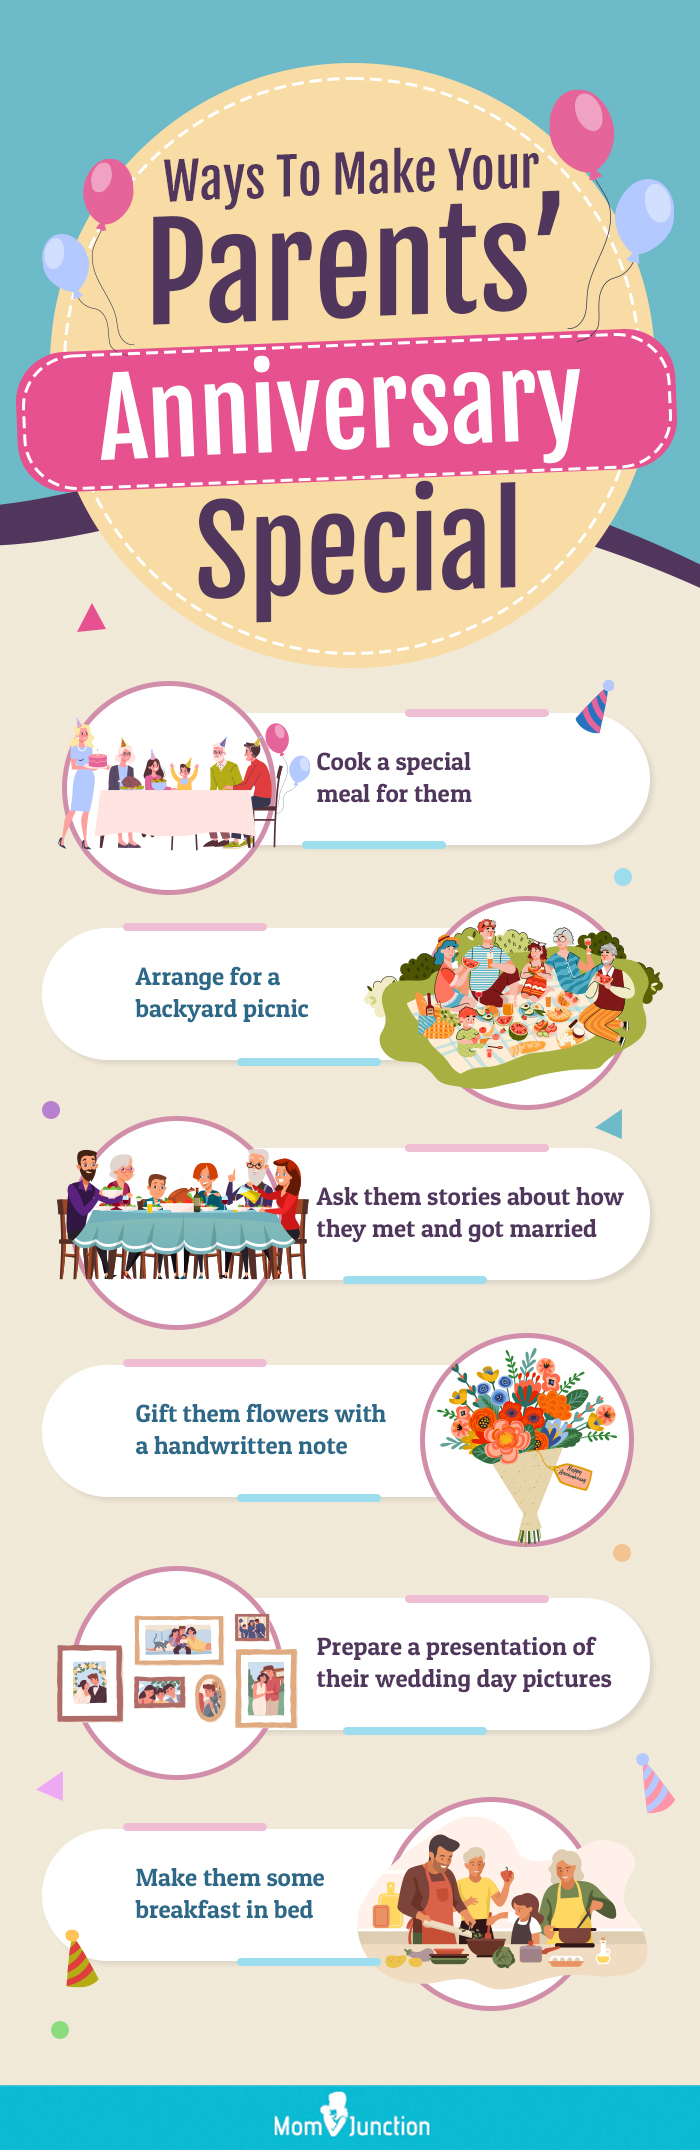 ways to make parents anniversary special (infographic)